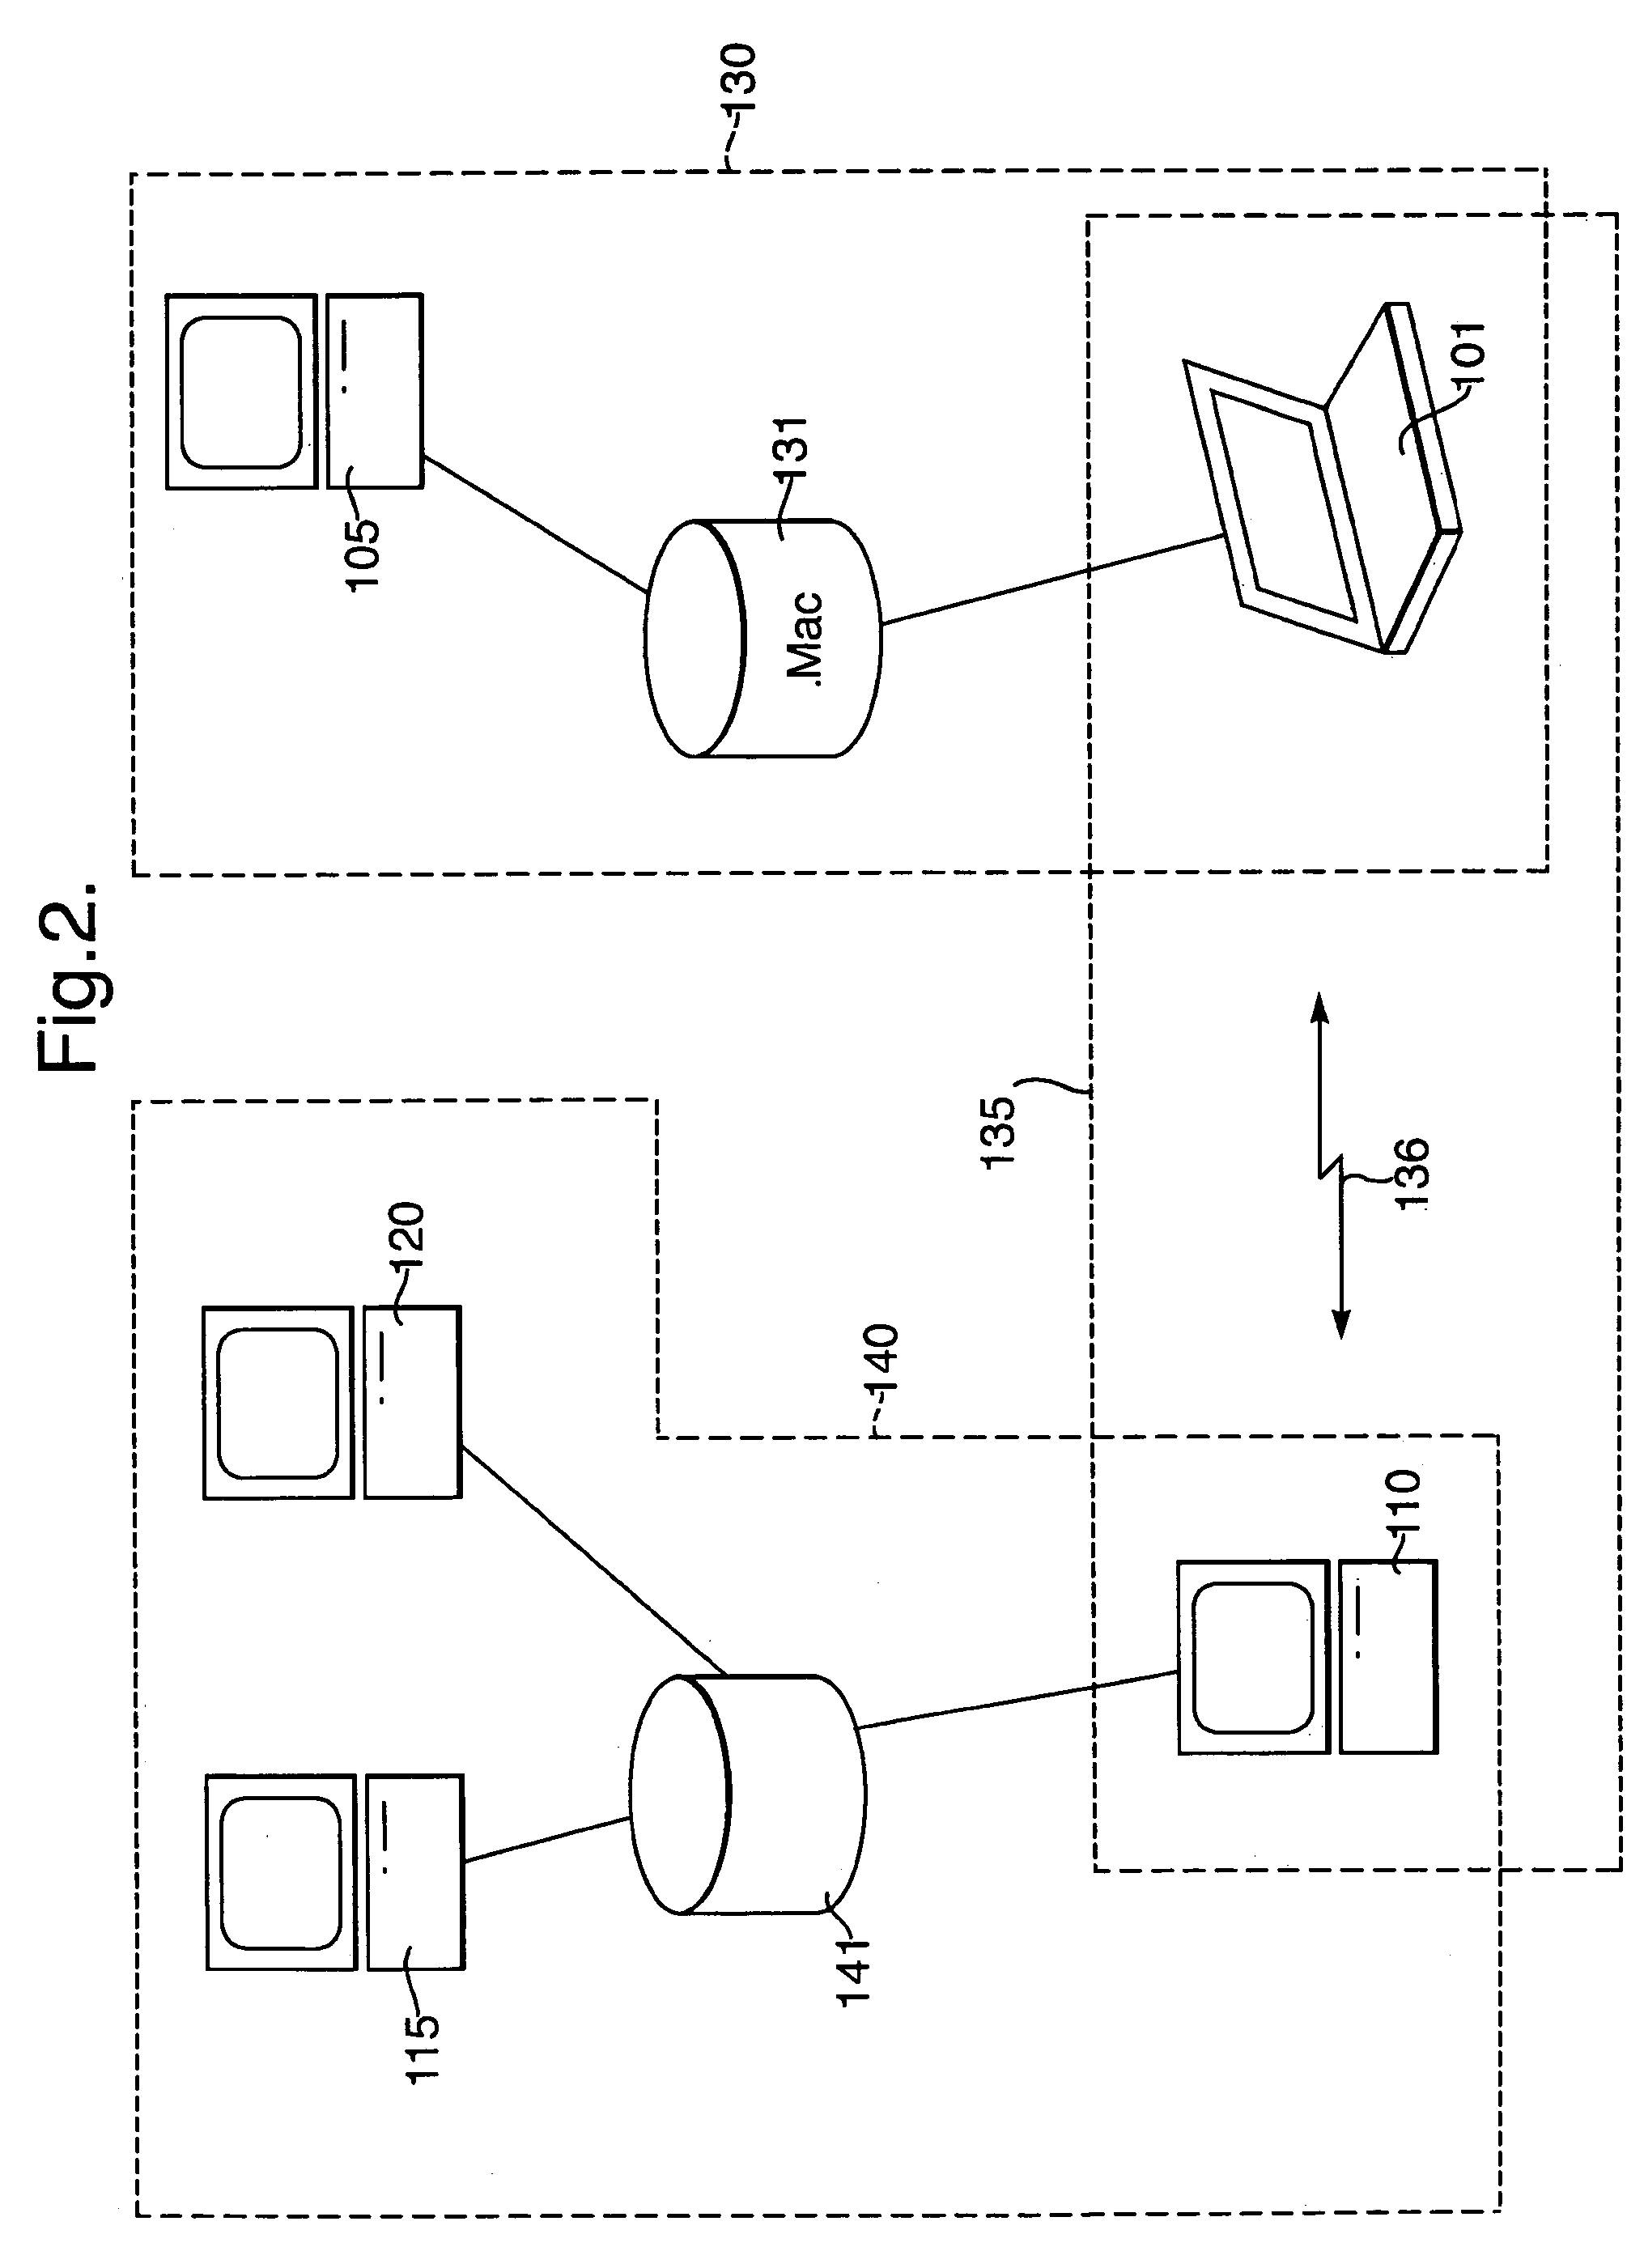 Method for sharing groups of objects